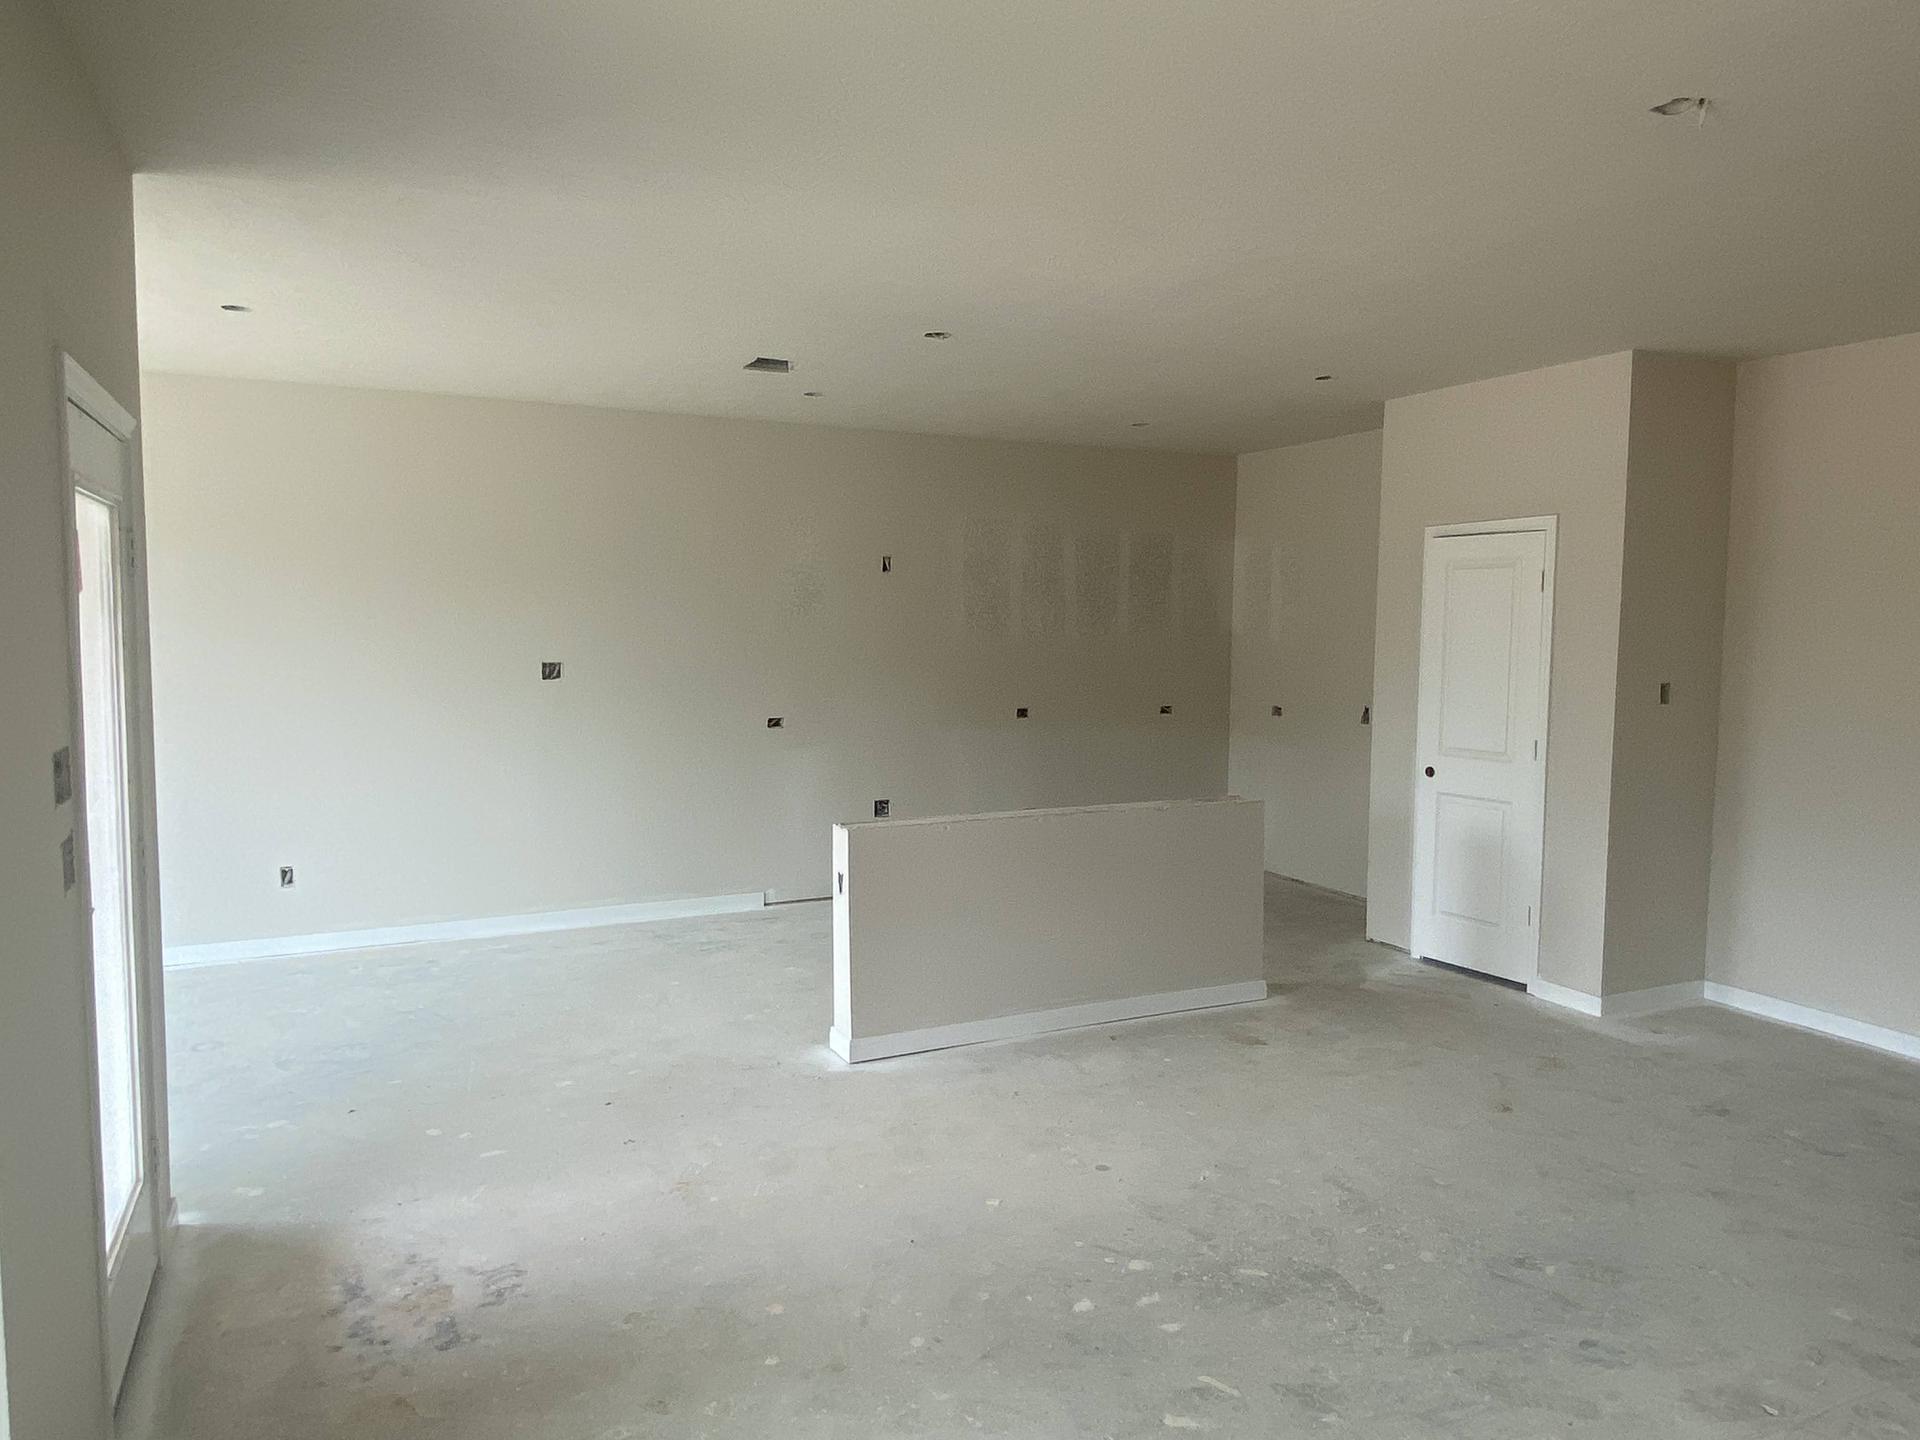 1,902sf New Home in Conroe, TX